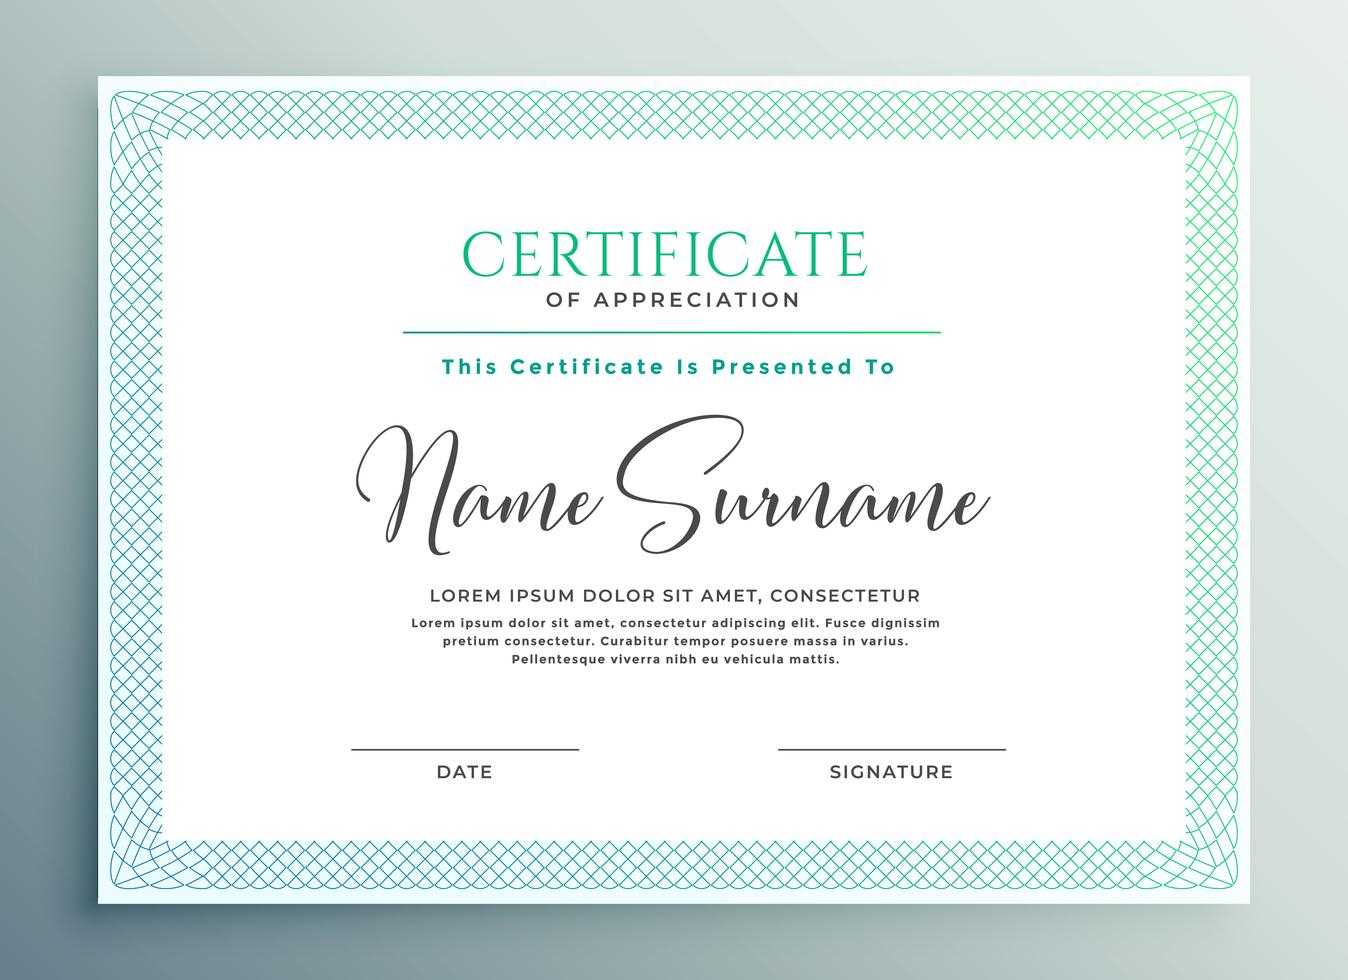 30+ Certificate Of Appreciation Download!! | Templates Study With Regard To Volunteer Of The Year Certificate Template